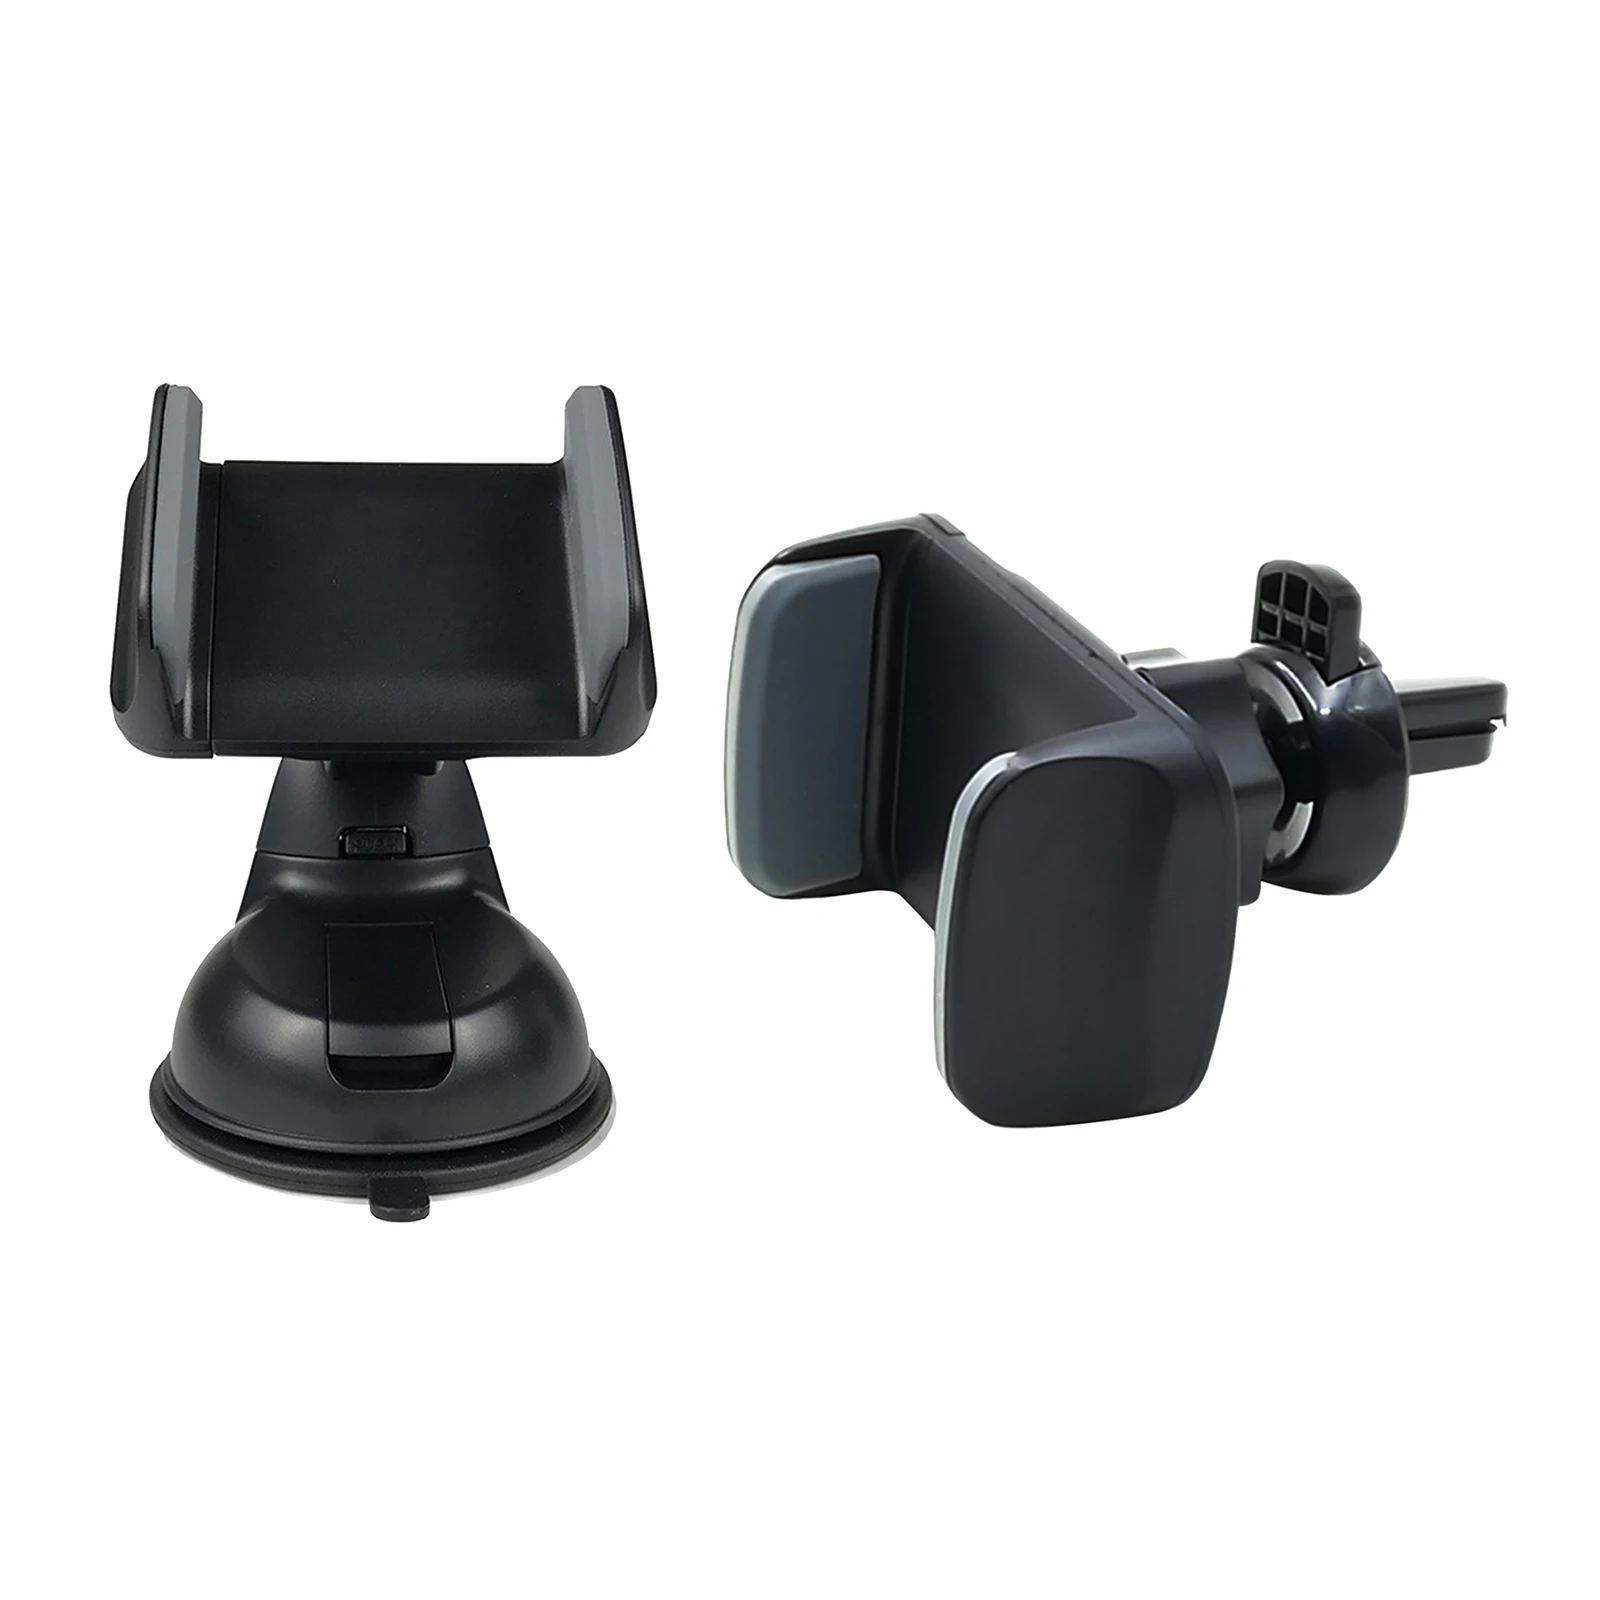 

Suction Cup Universal Car Phone Holder Silicone 360 Degree Rotation Mobilephone Mount for Auto Air Vent Most Smartphone Hands